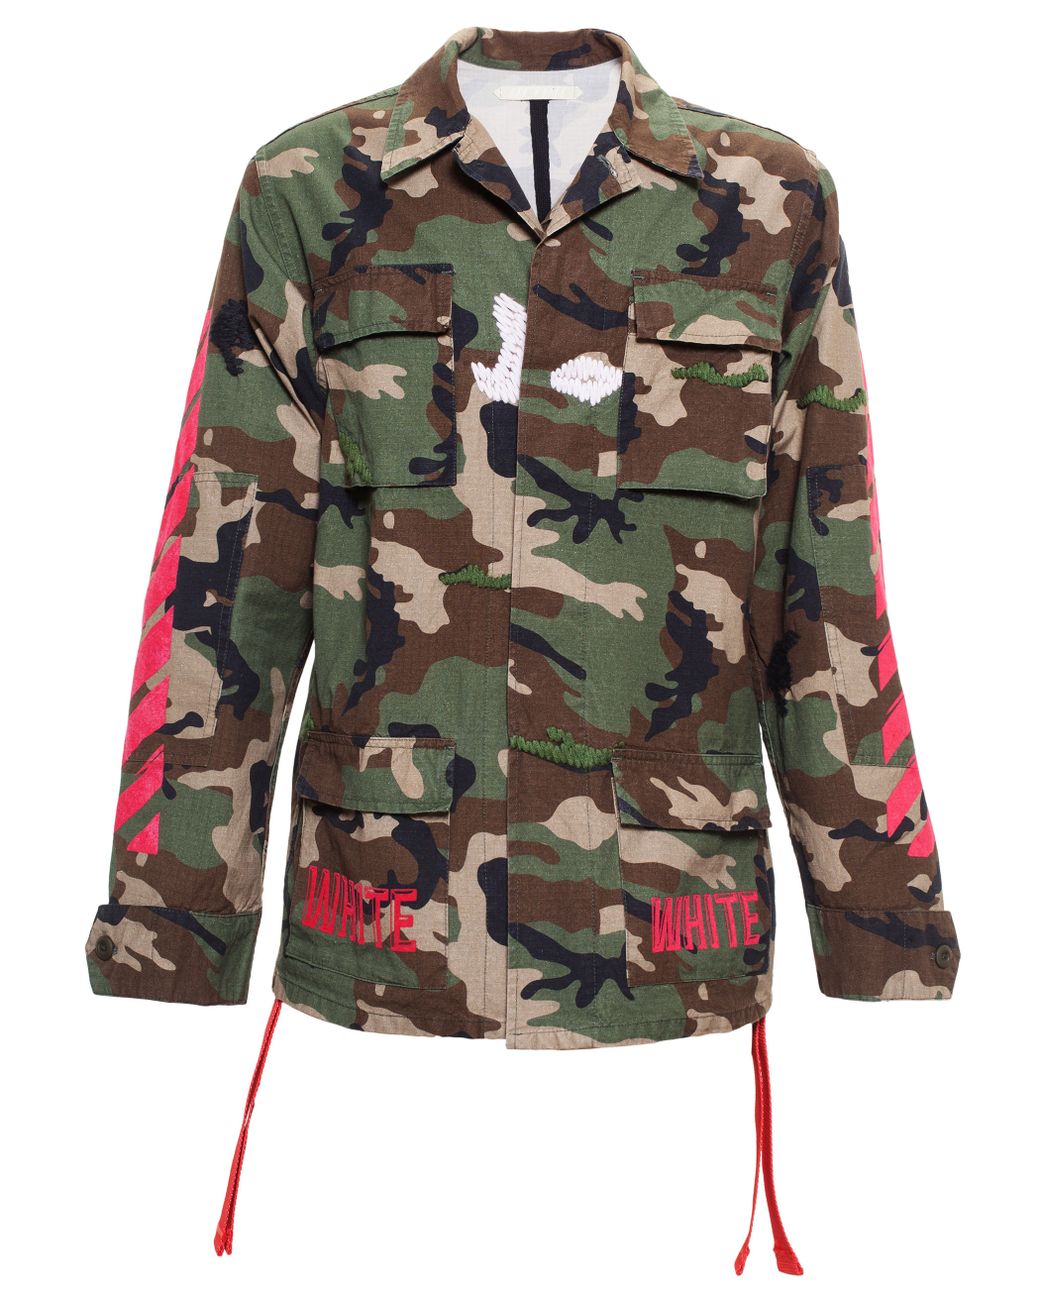 Off-White c/o Virgil Abloh Camouflage Sport Jacket in | Lyst